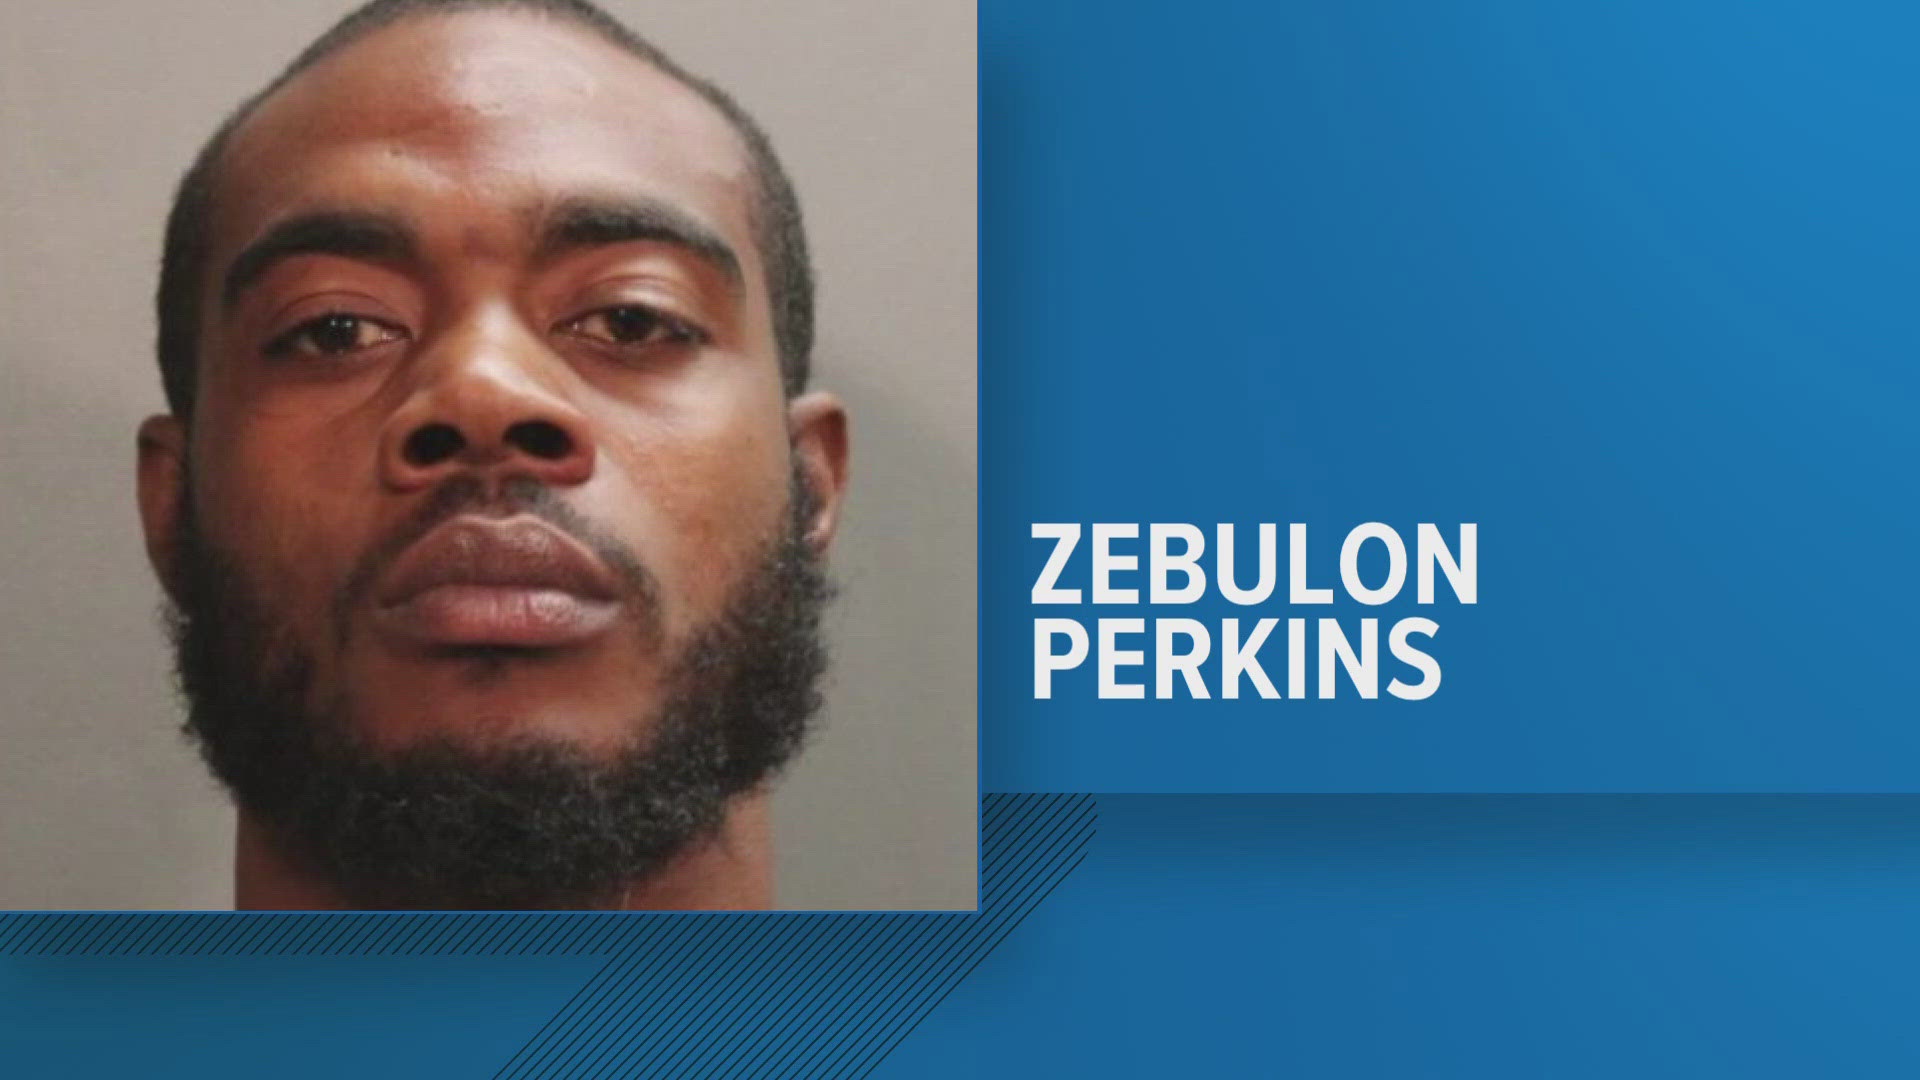 Zebulon Perkins entered a negotiated guilty plea for a 70-year sentence in March.